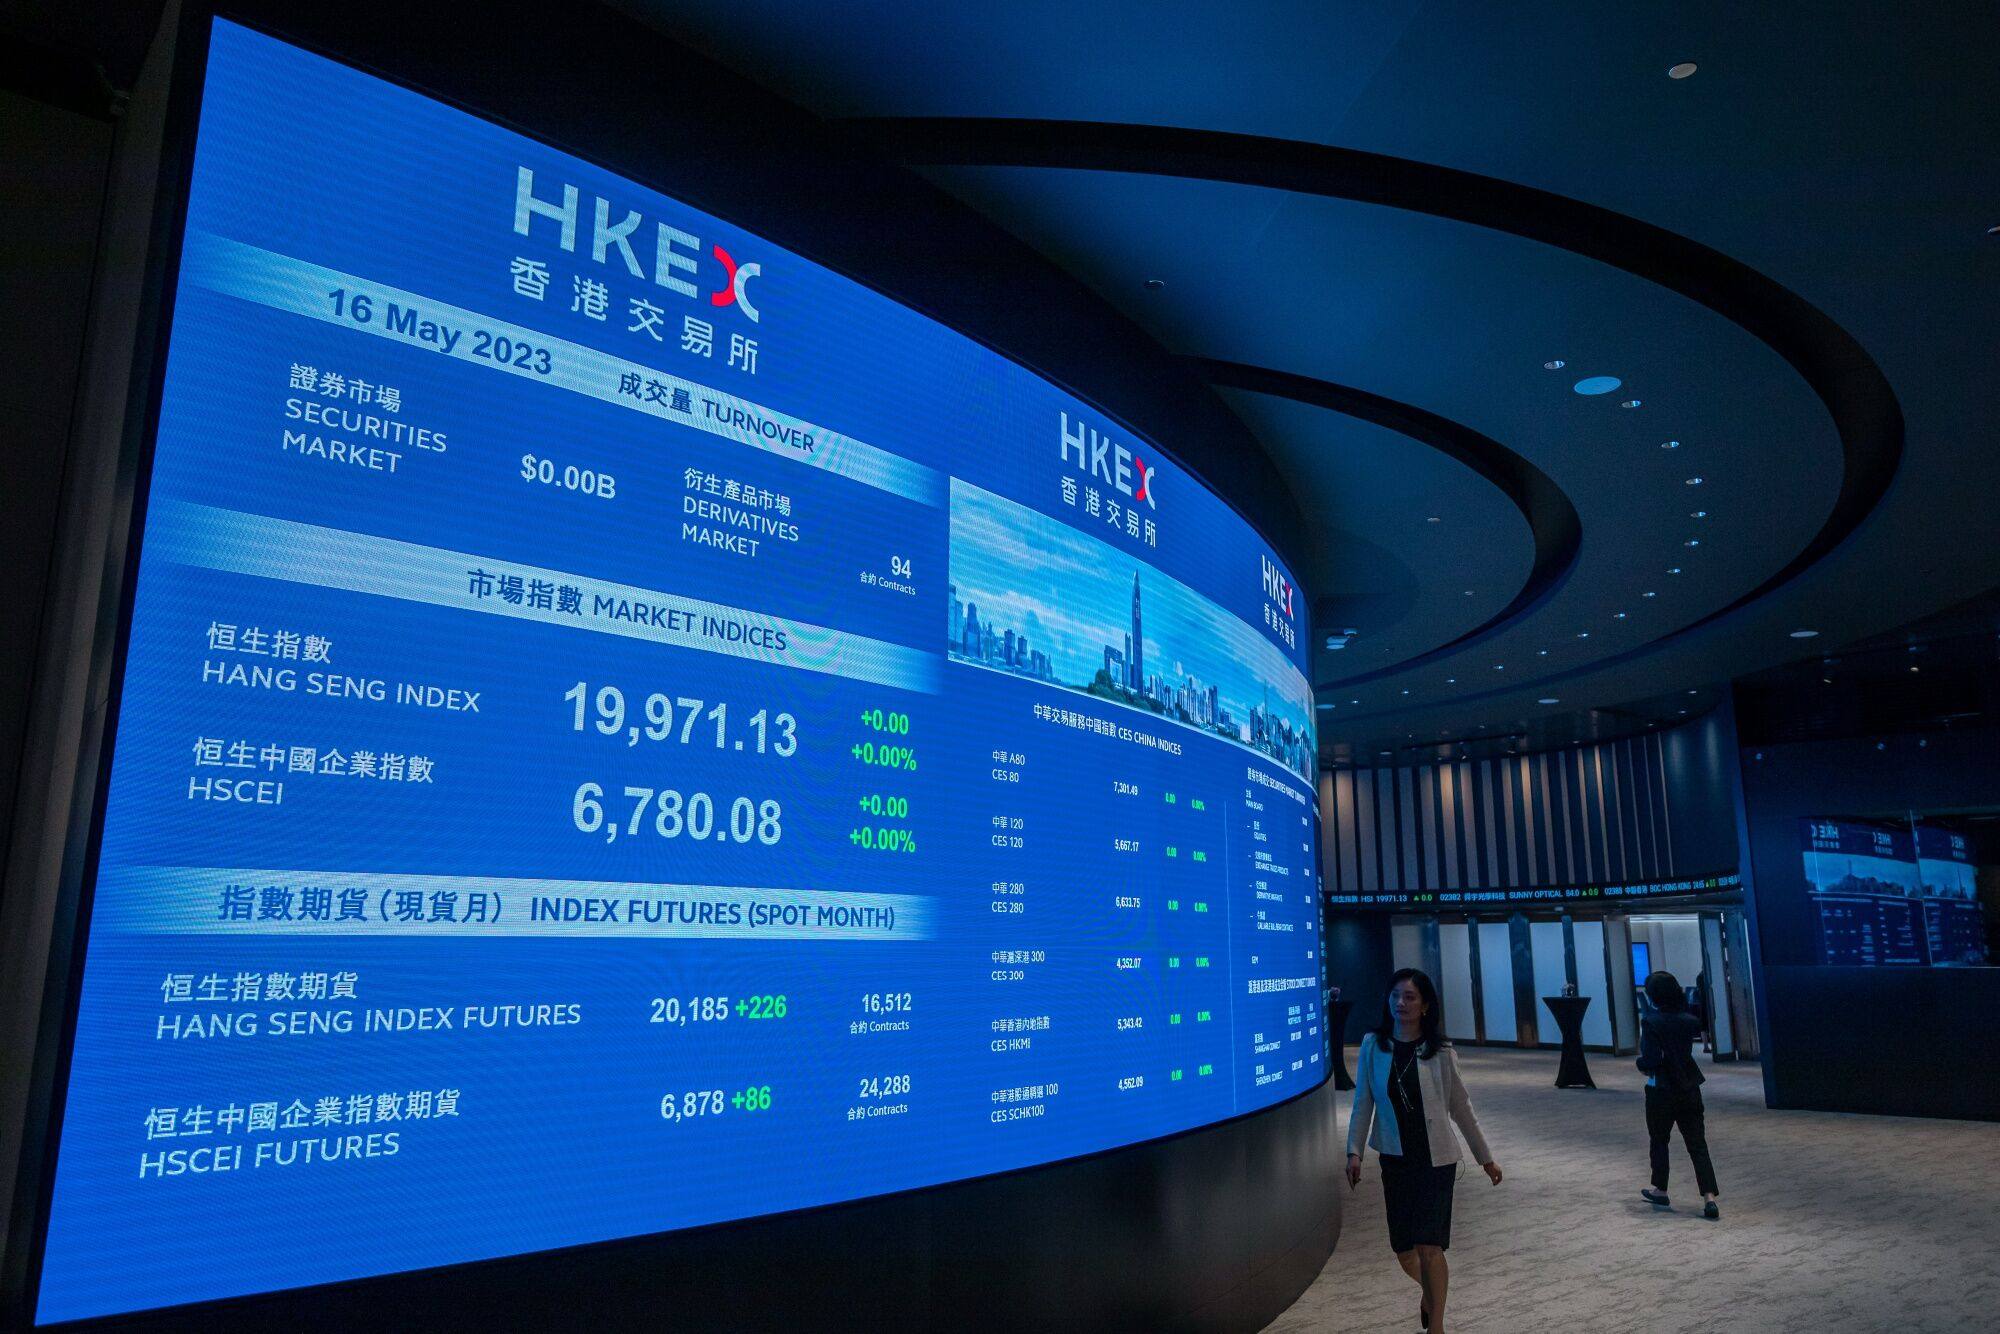 The sell-off in the shares of Chinese companies listed in Hong Kong has accelerated amid doubts about the nation’s economic recovery. Photo: Bloomberg